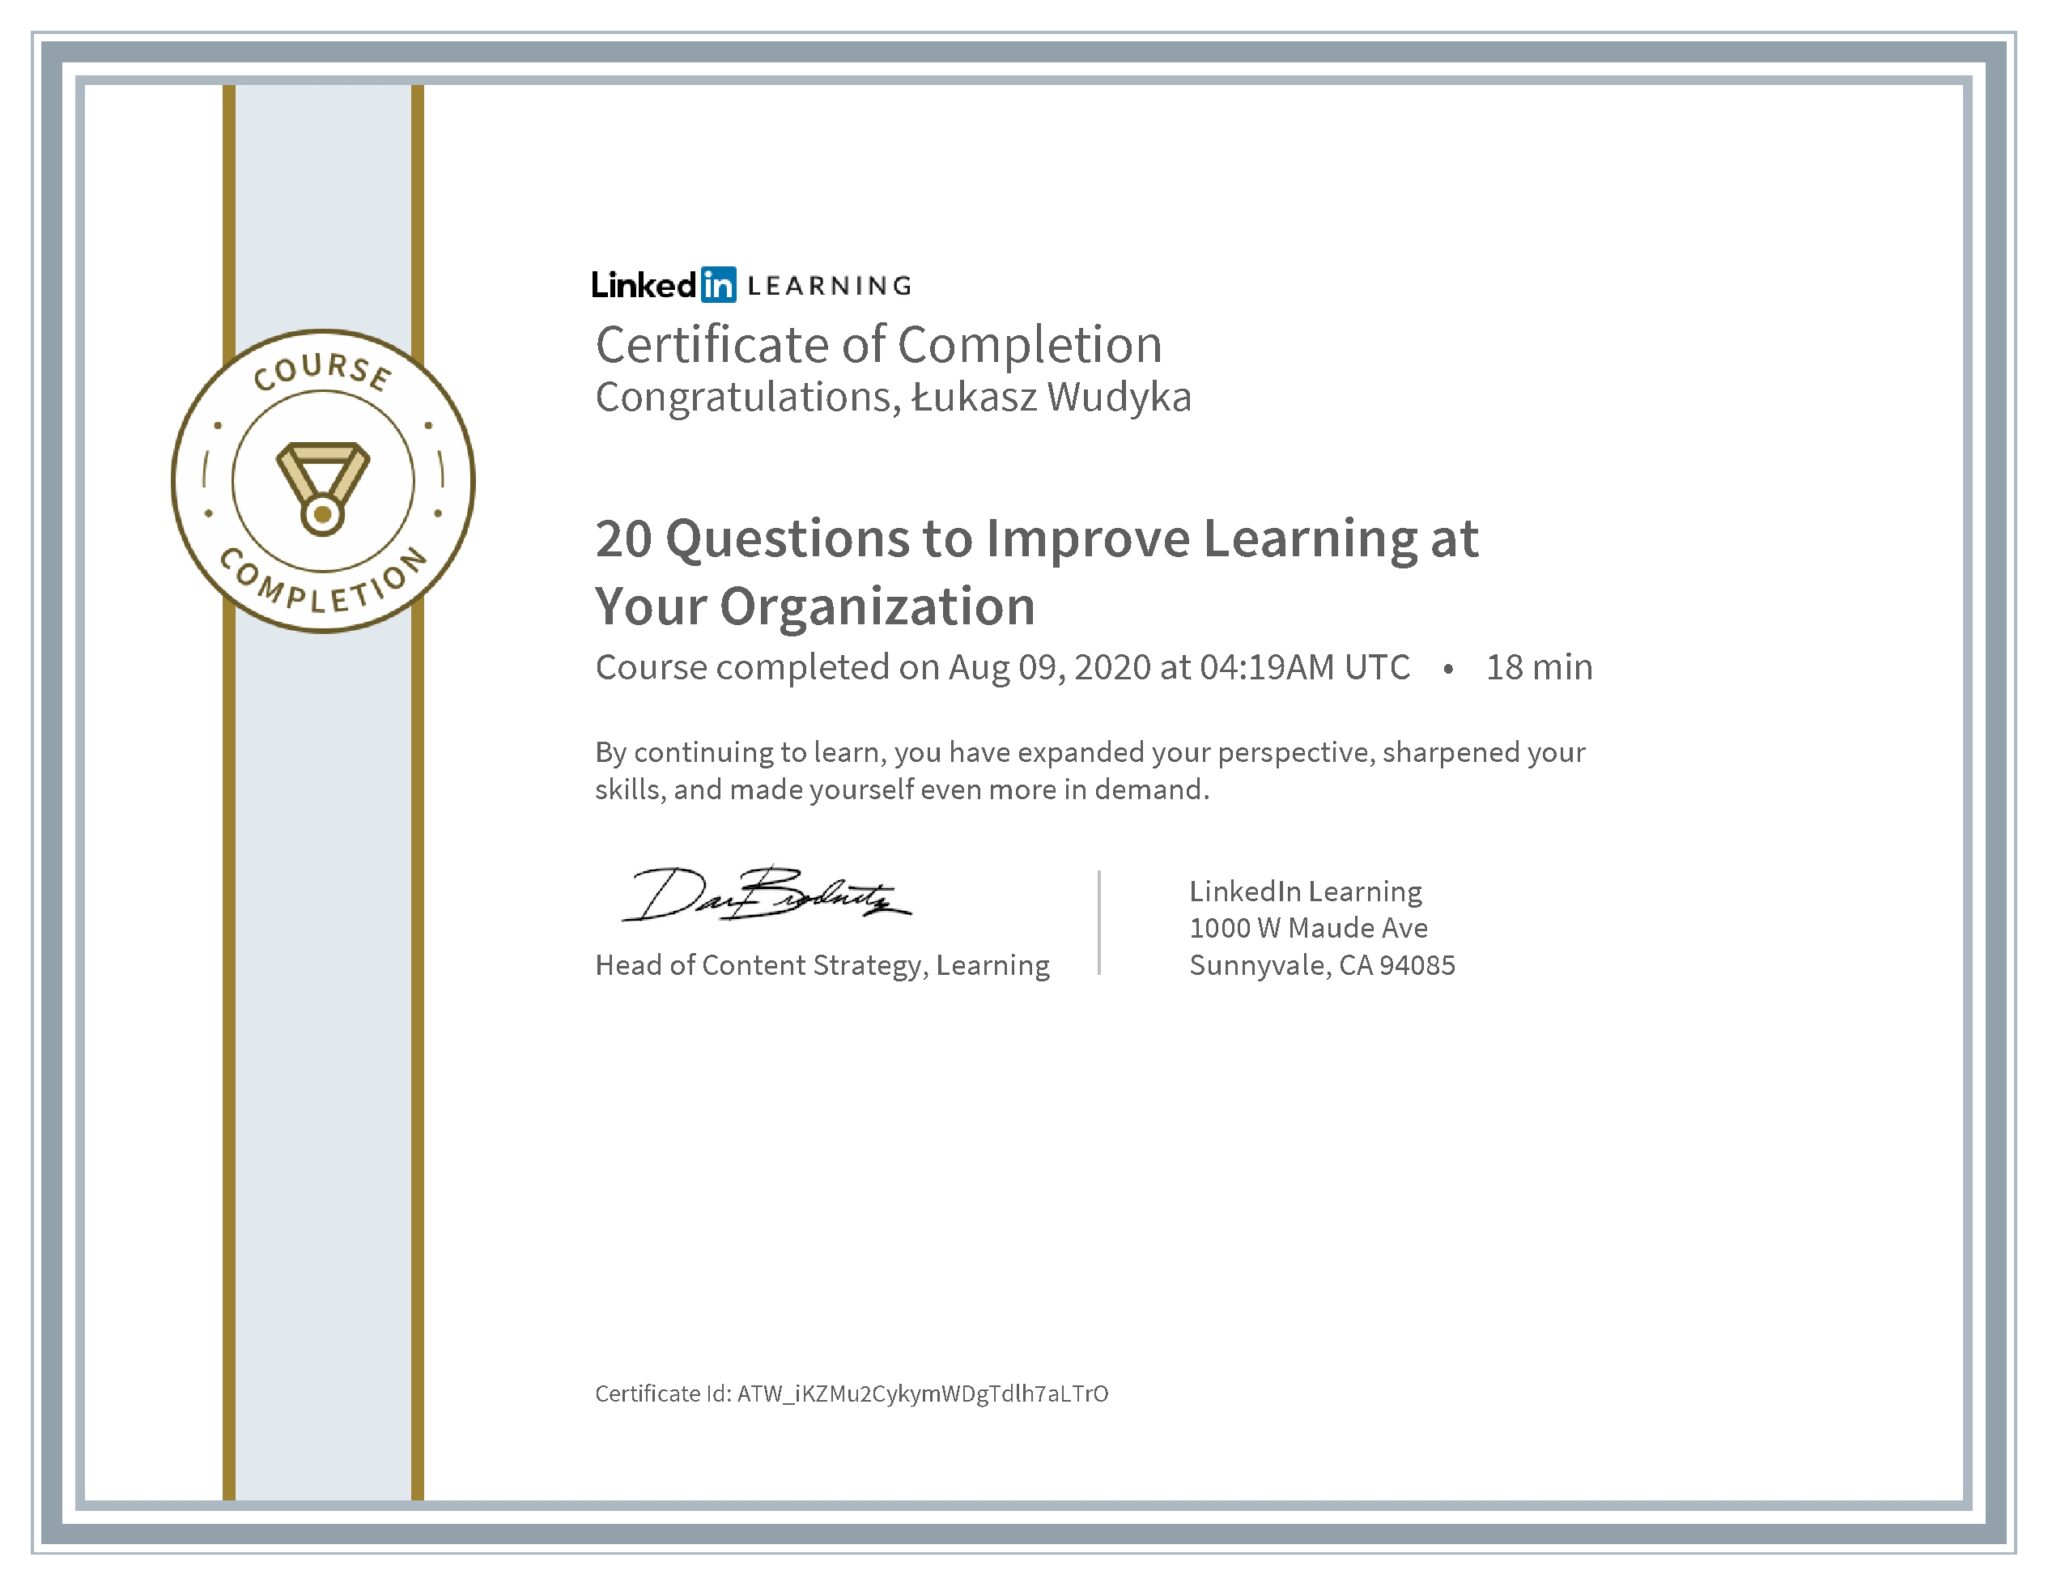 Łukasz Wudyka certyfikat LinkedIn 20 Questions to Improve Learning at Your Organization